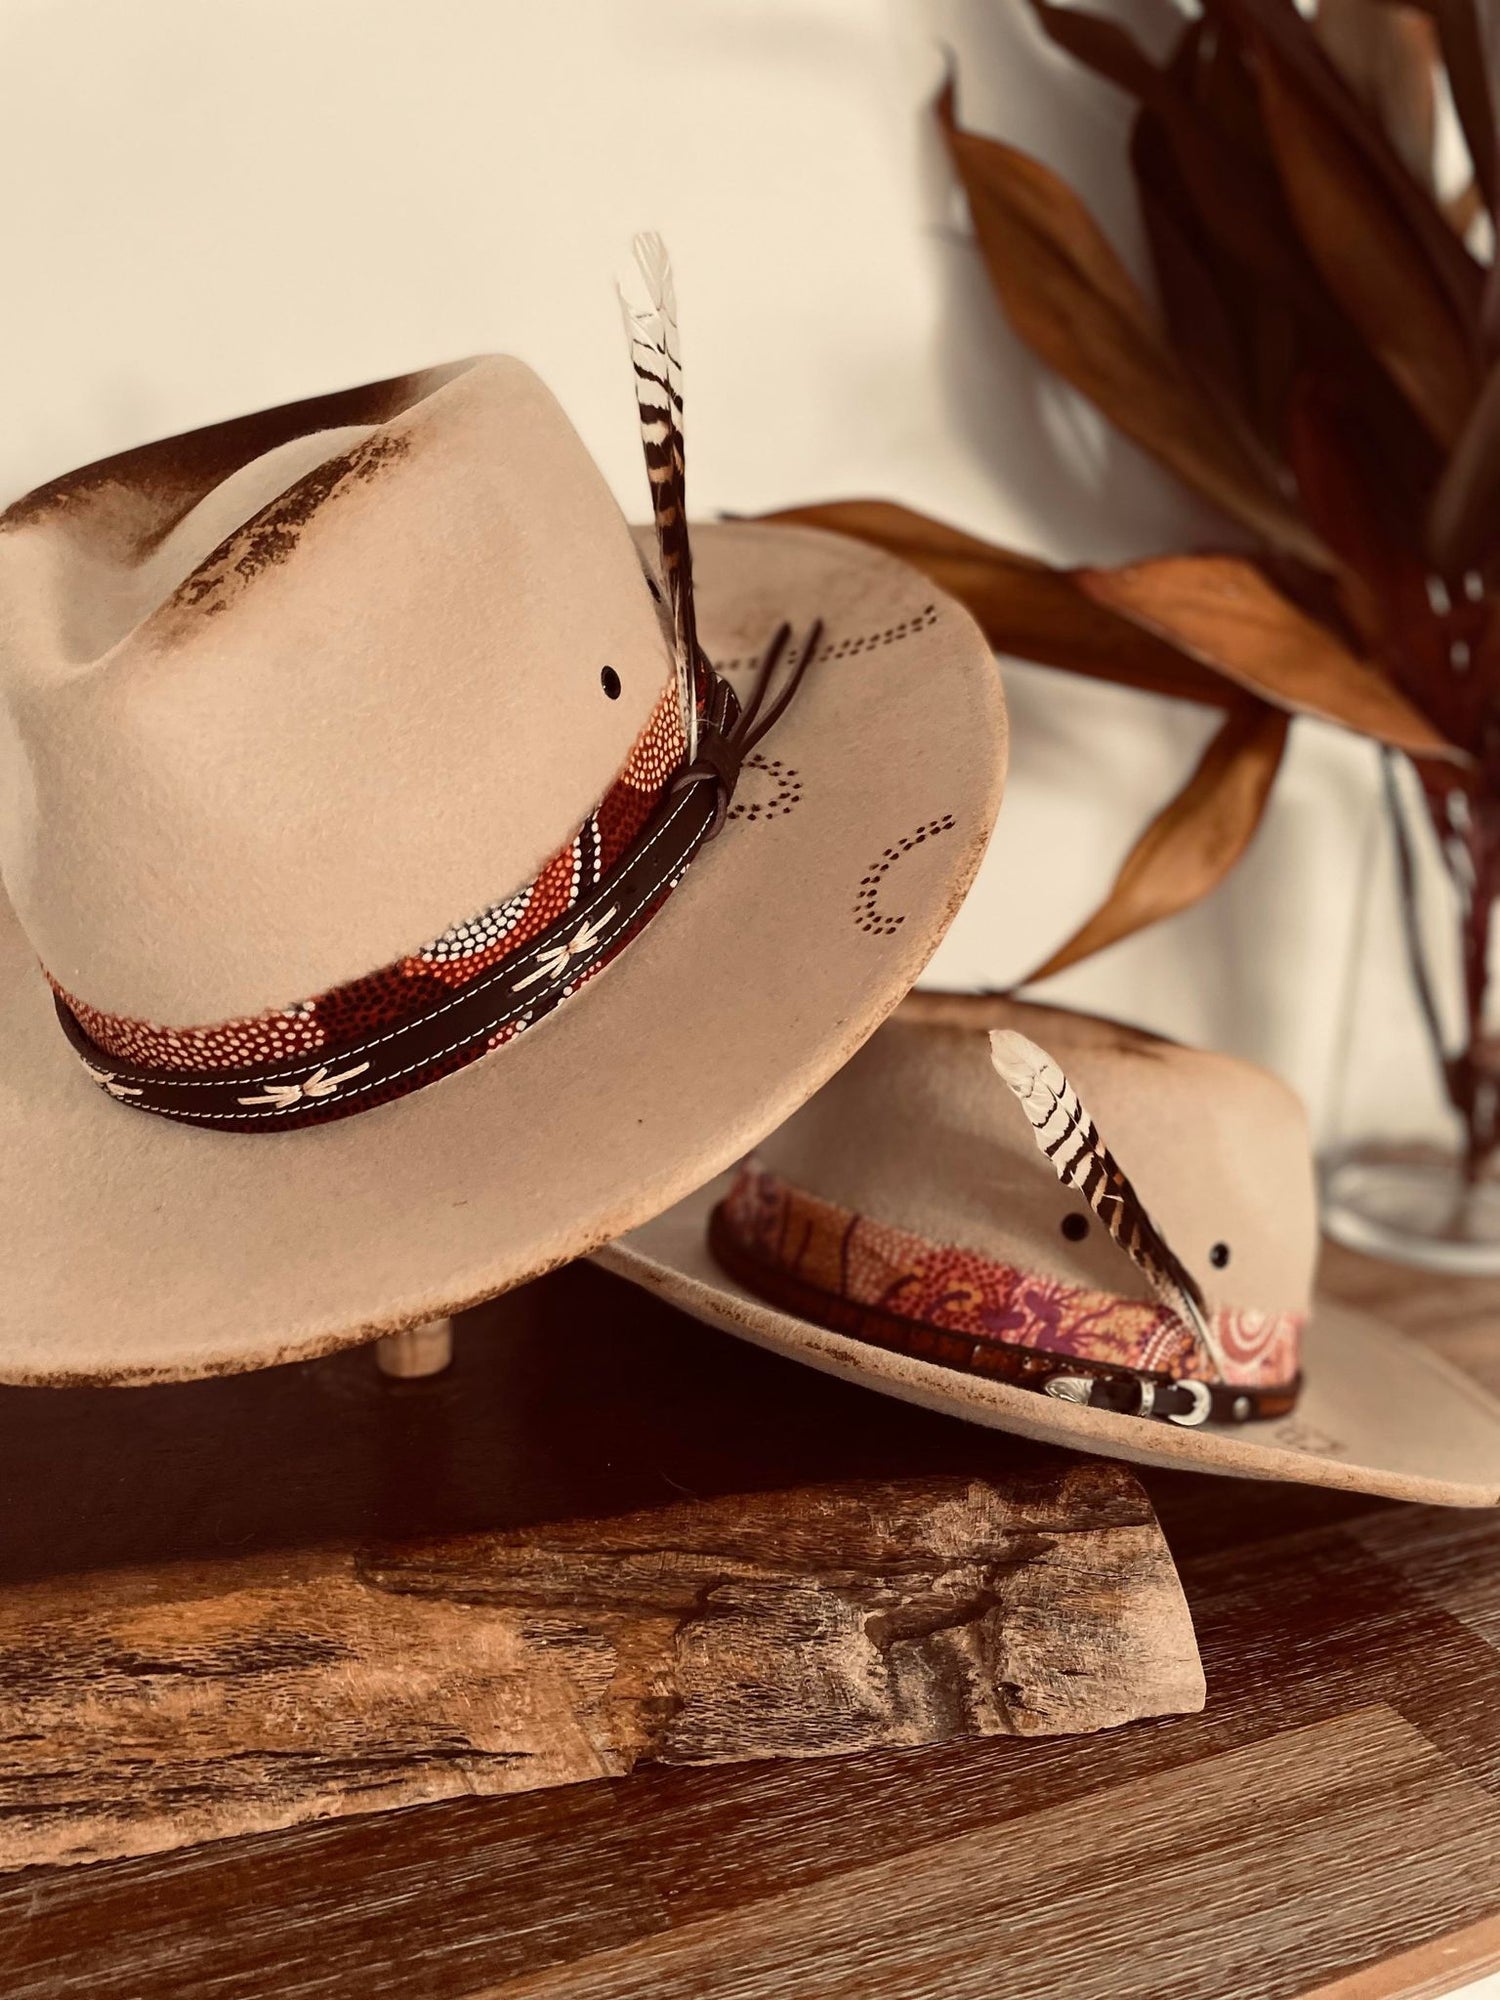 Hats on Country